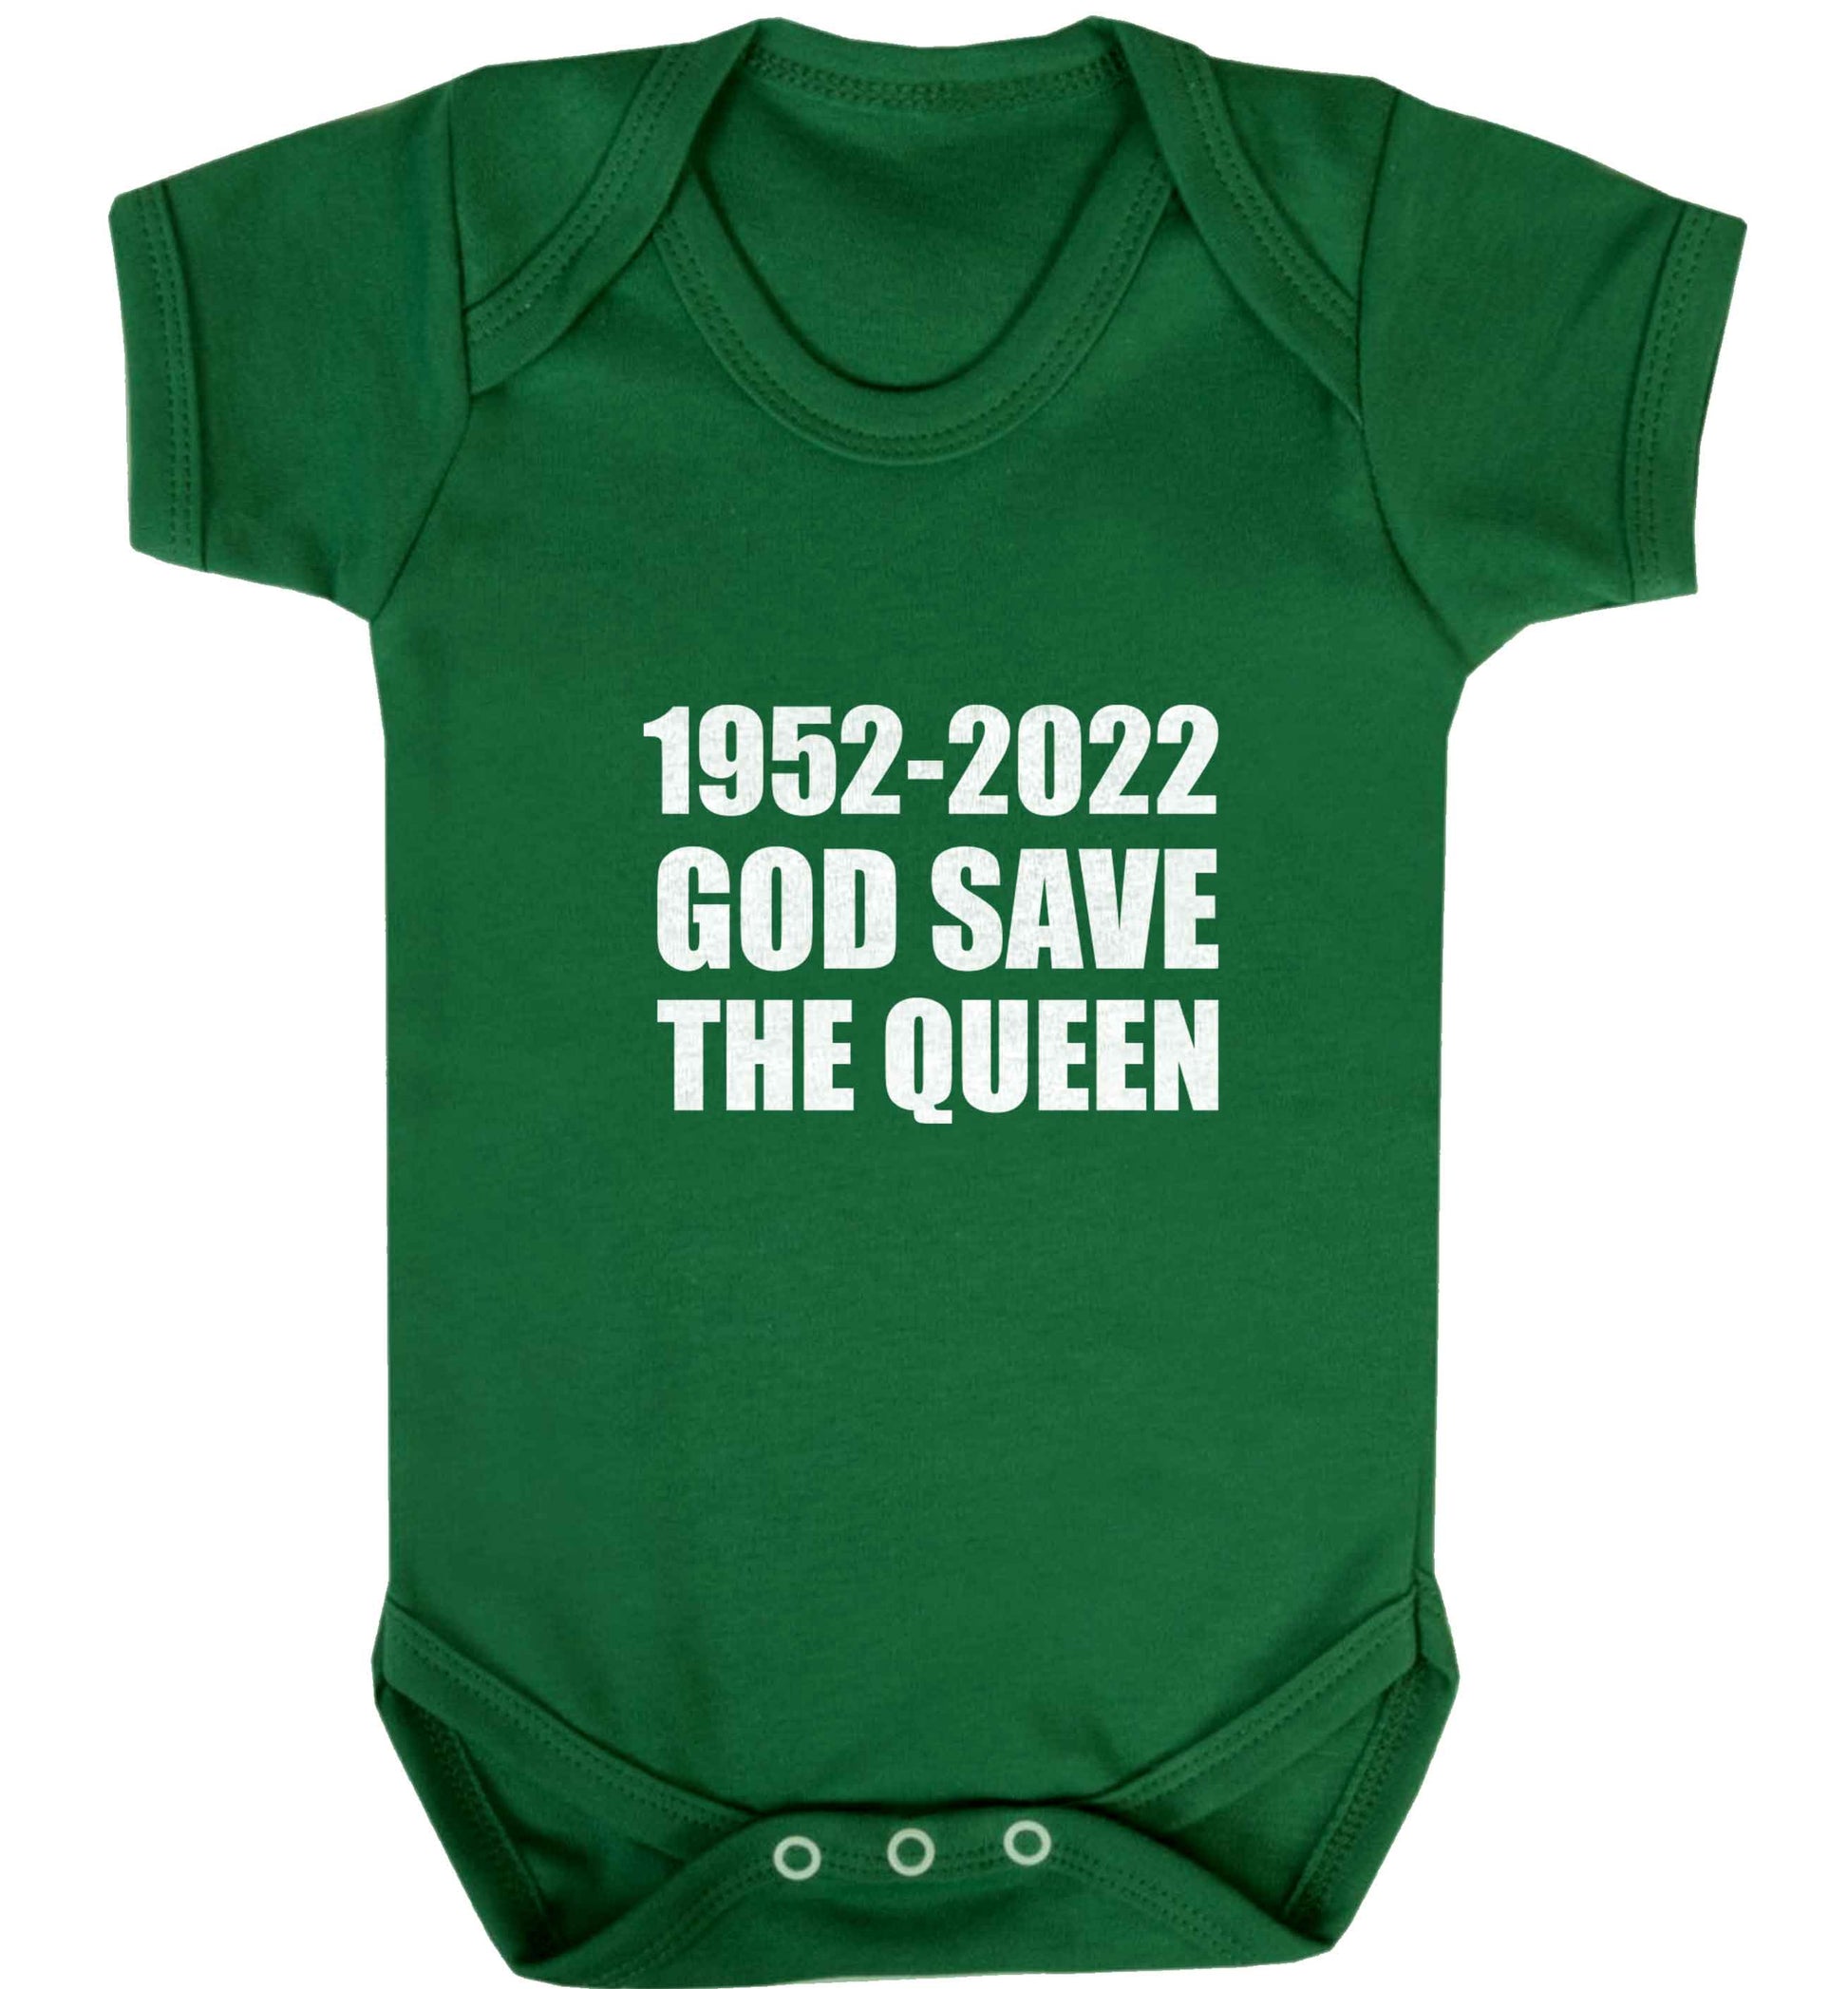 God save the queen baby vest green 18-24 months